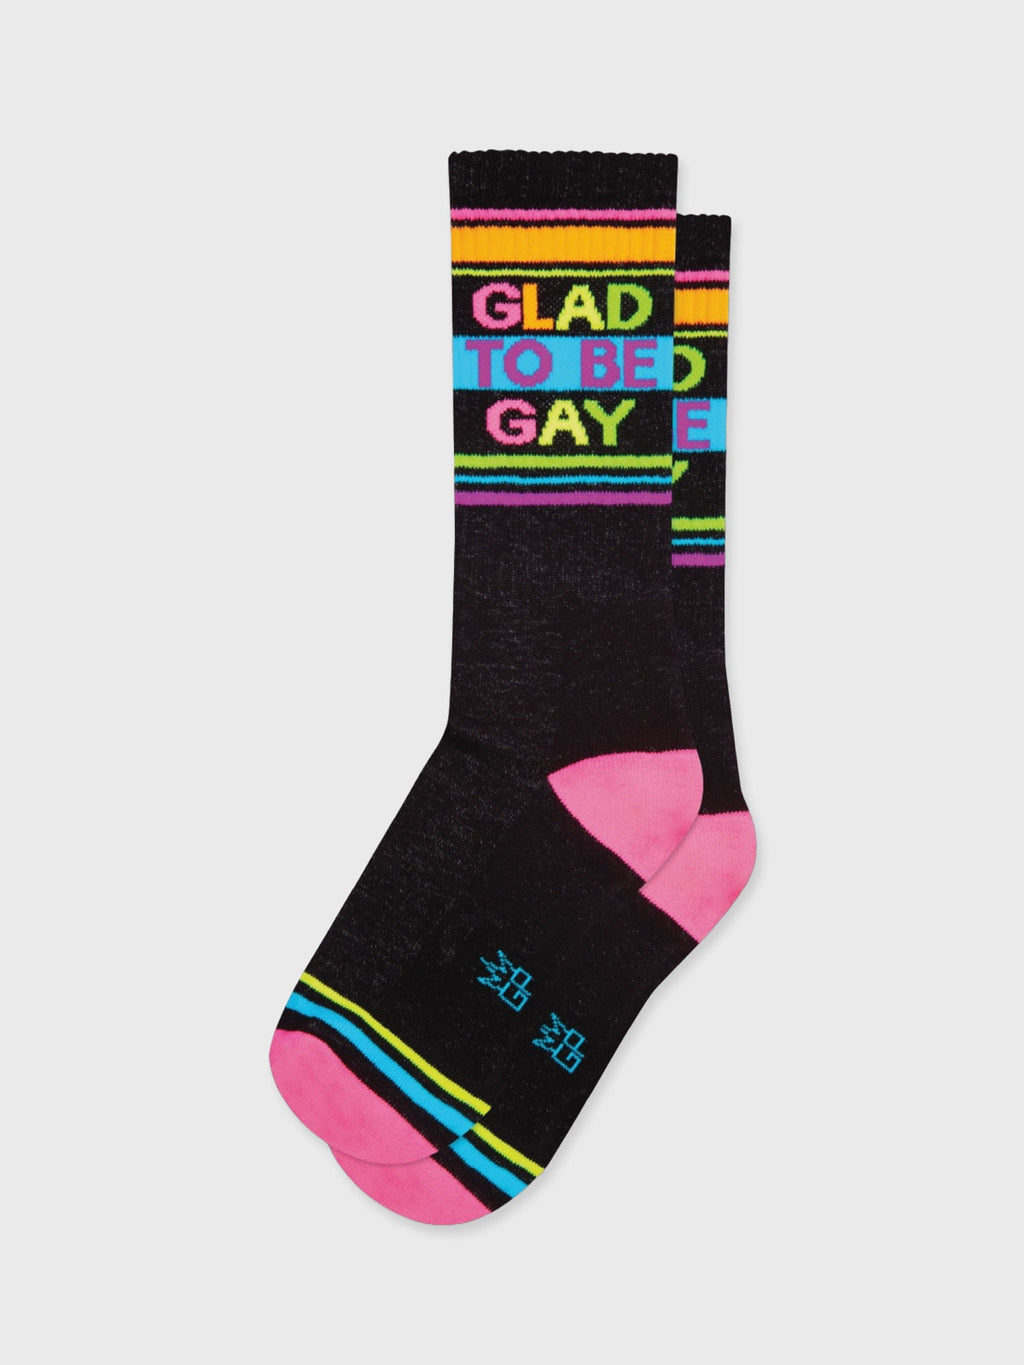 Gumball Poodle - Glad To Be Gay Socks